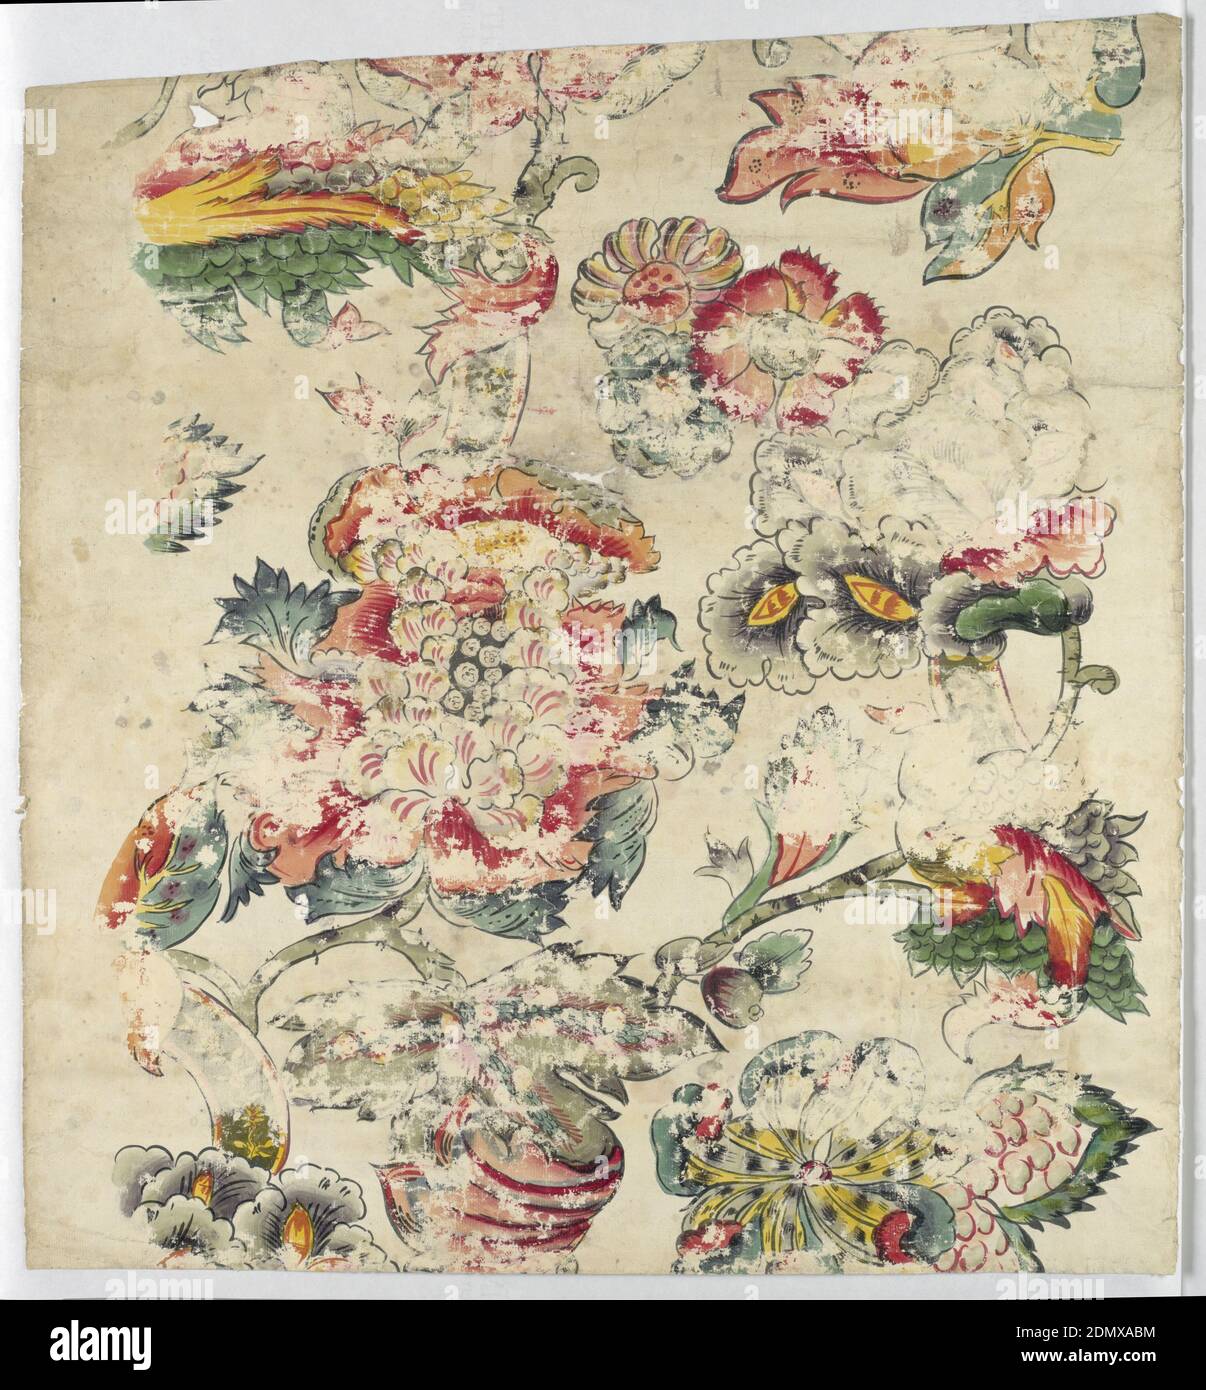 Sidewall, Ink and water color on handmade paper, Large, fantastic flowers connected by branches, in the manner of chintzes; polychrome, with black contours, on unpainted ground. Paint rubbed off on numerous places. On back: excise stamp with faintly visible G R., England, ca. 1730, Wallcoverings, Sidewall Stock Photo